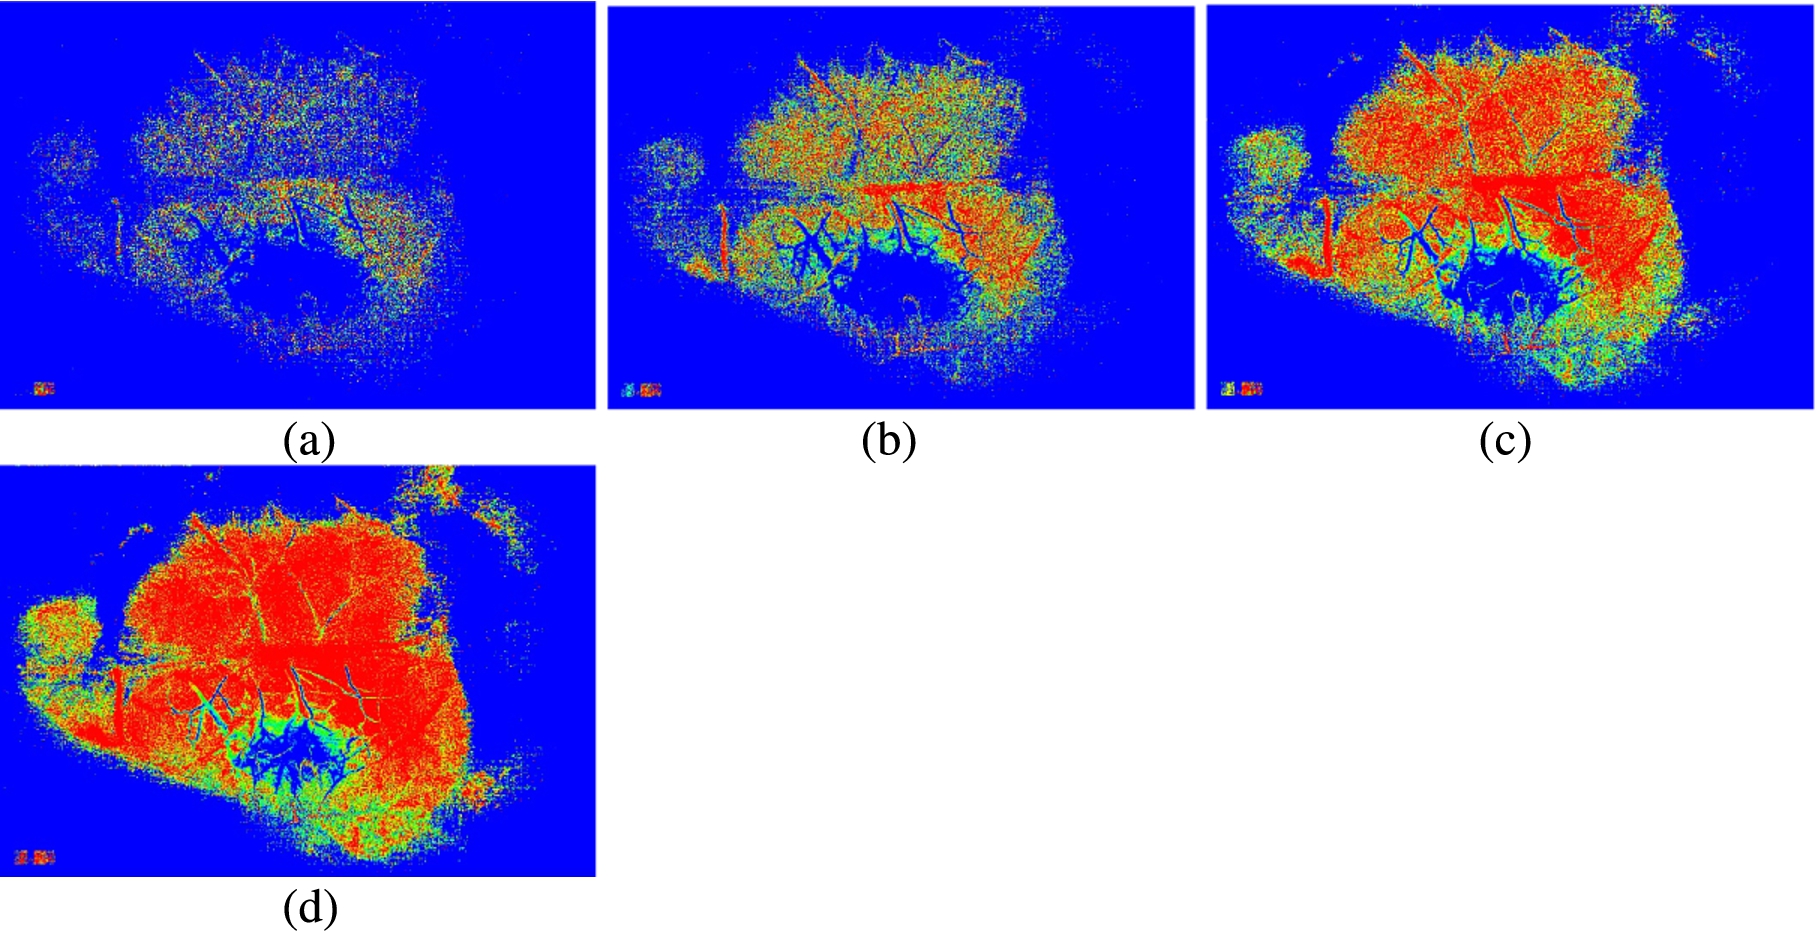 MHI images generated with different buffer sizes with a threshold value of 14. The buffer size is equal to (a) 4; (b) 6; (c) 8; (d) 10.